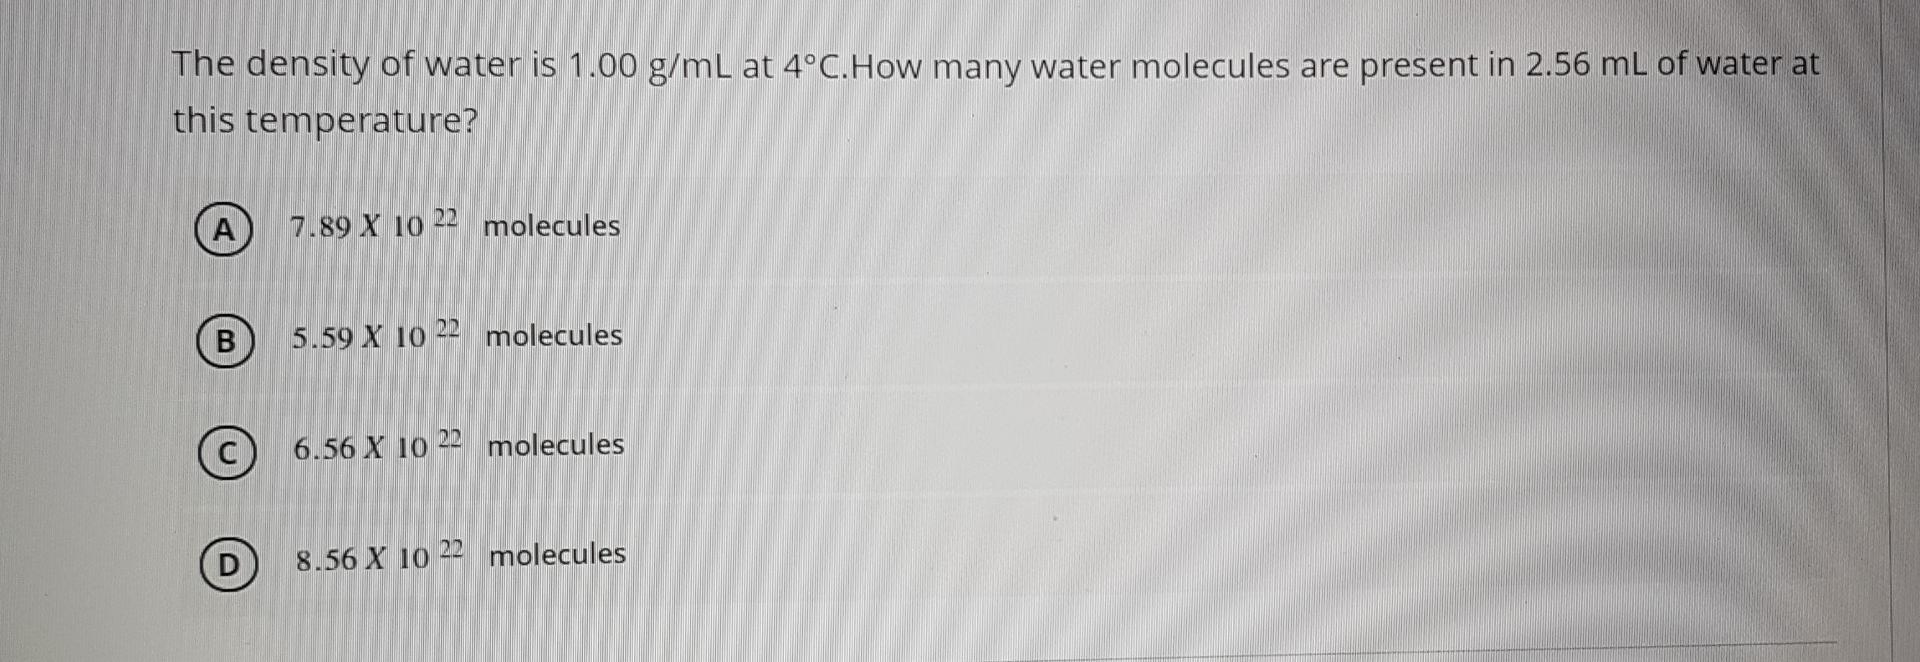 Solved The density of water is 1.00 g/mL at 48C. How many